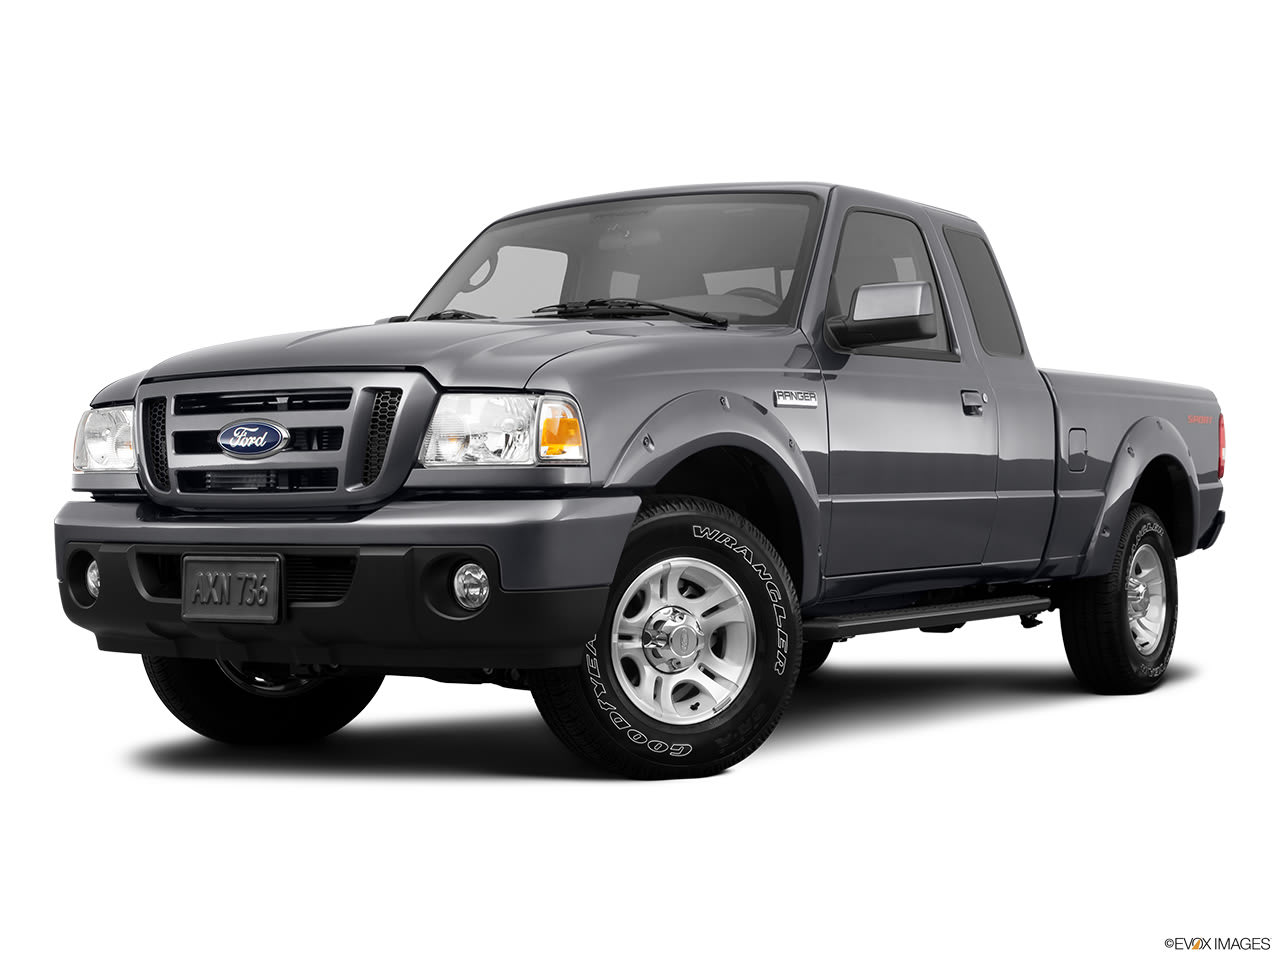 A Buyer’s Guide to the 2011 Ford Ranger | YourMechanic Advice